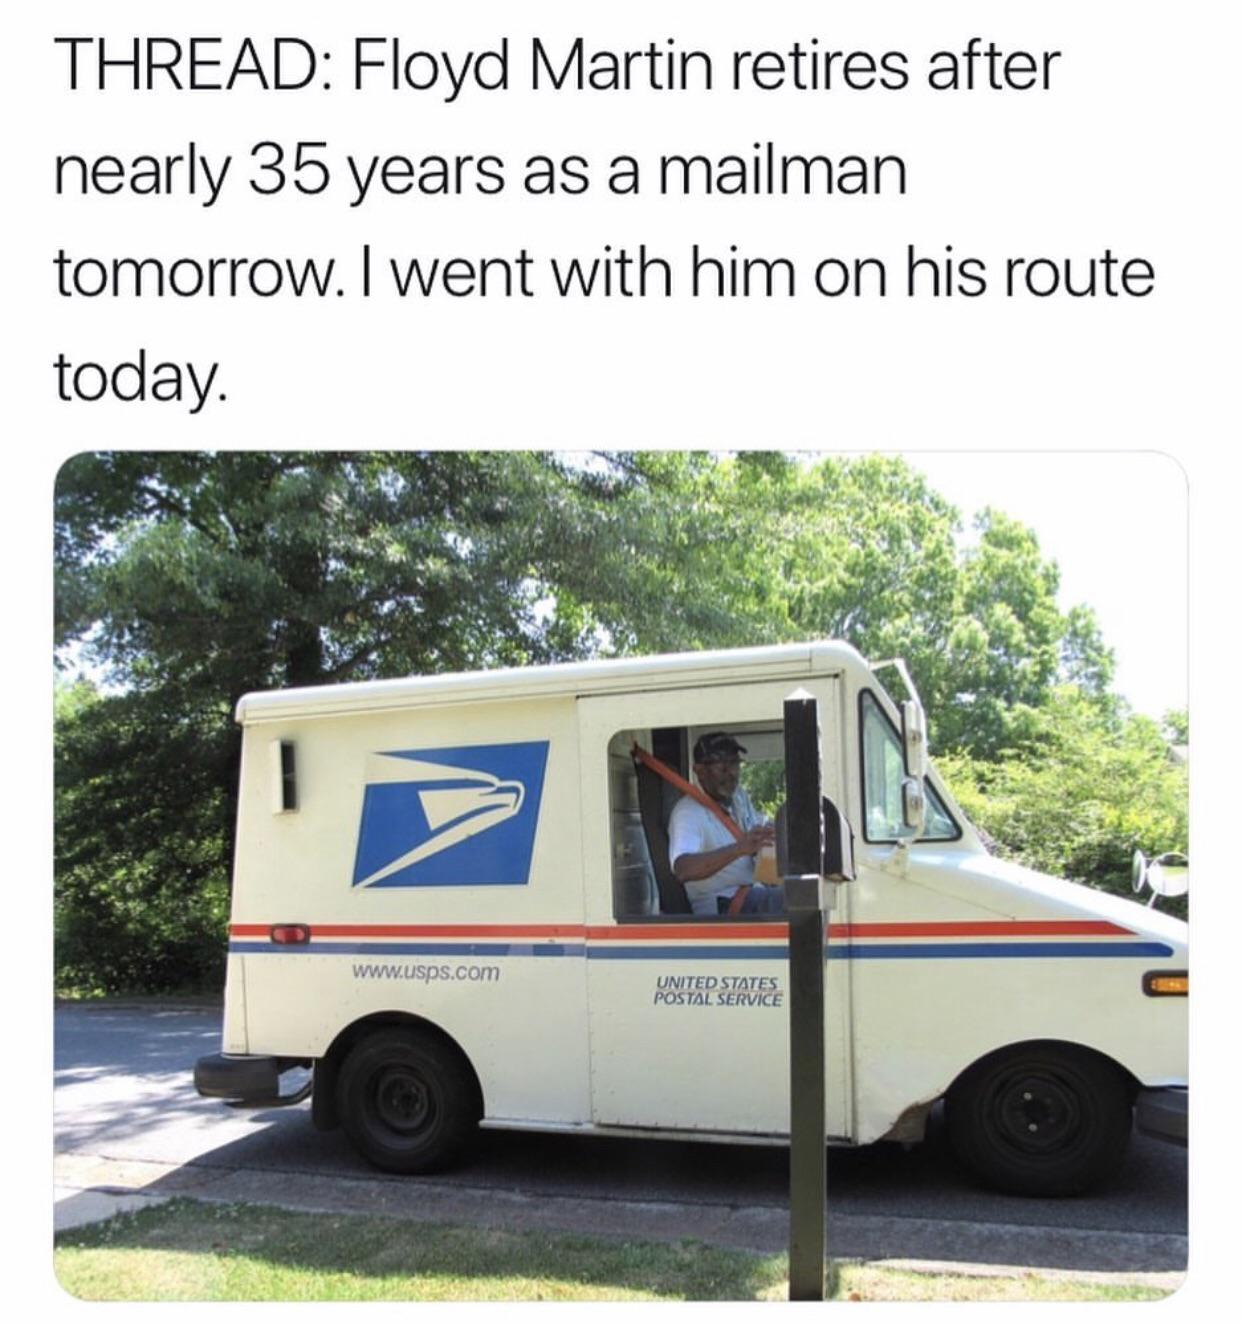 Wholesome memes, Floyd, Florida Wholesome Memes Wholesome memes, Floyd, Florida text: THREAD: Floyd Martin retires after nearly 35 years as a mailman tomorrow. I went with him on his route today. wuw.usps.com IJNITED srnres ros mt SERVICE 